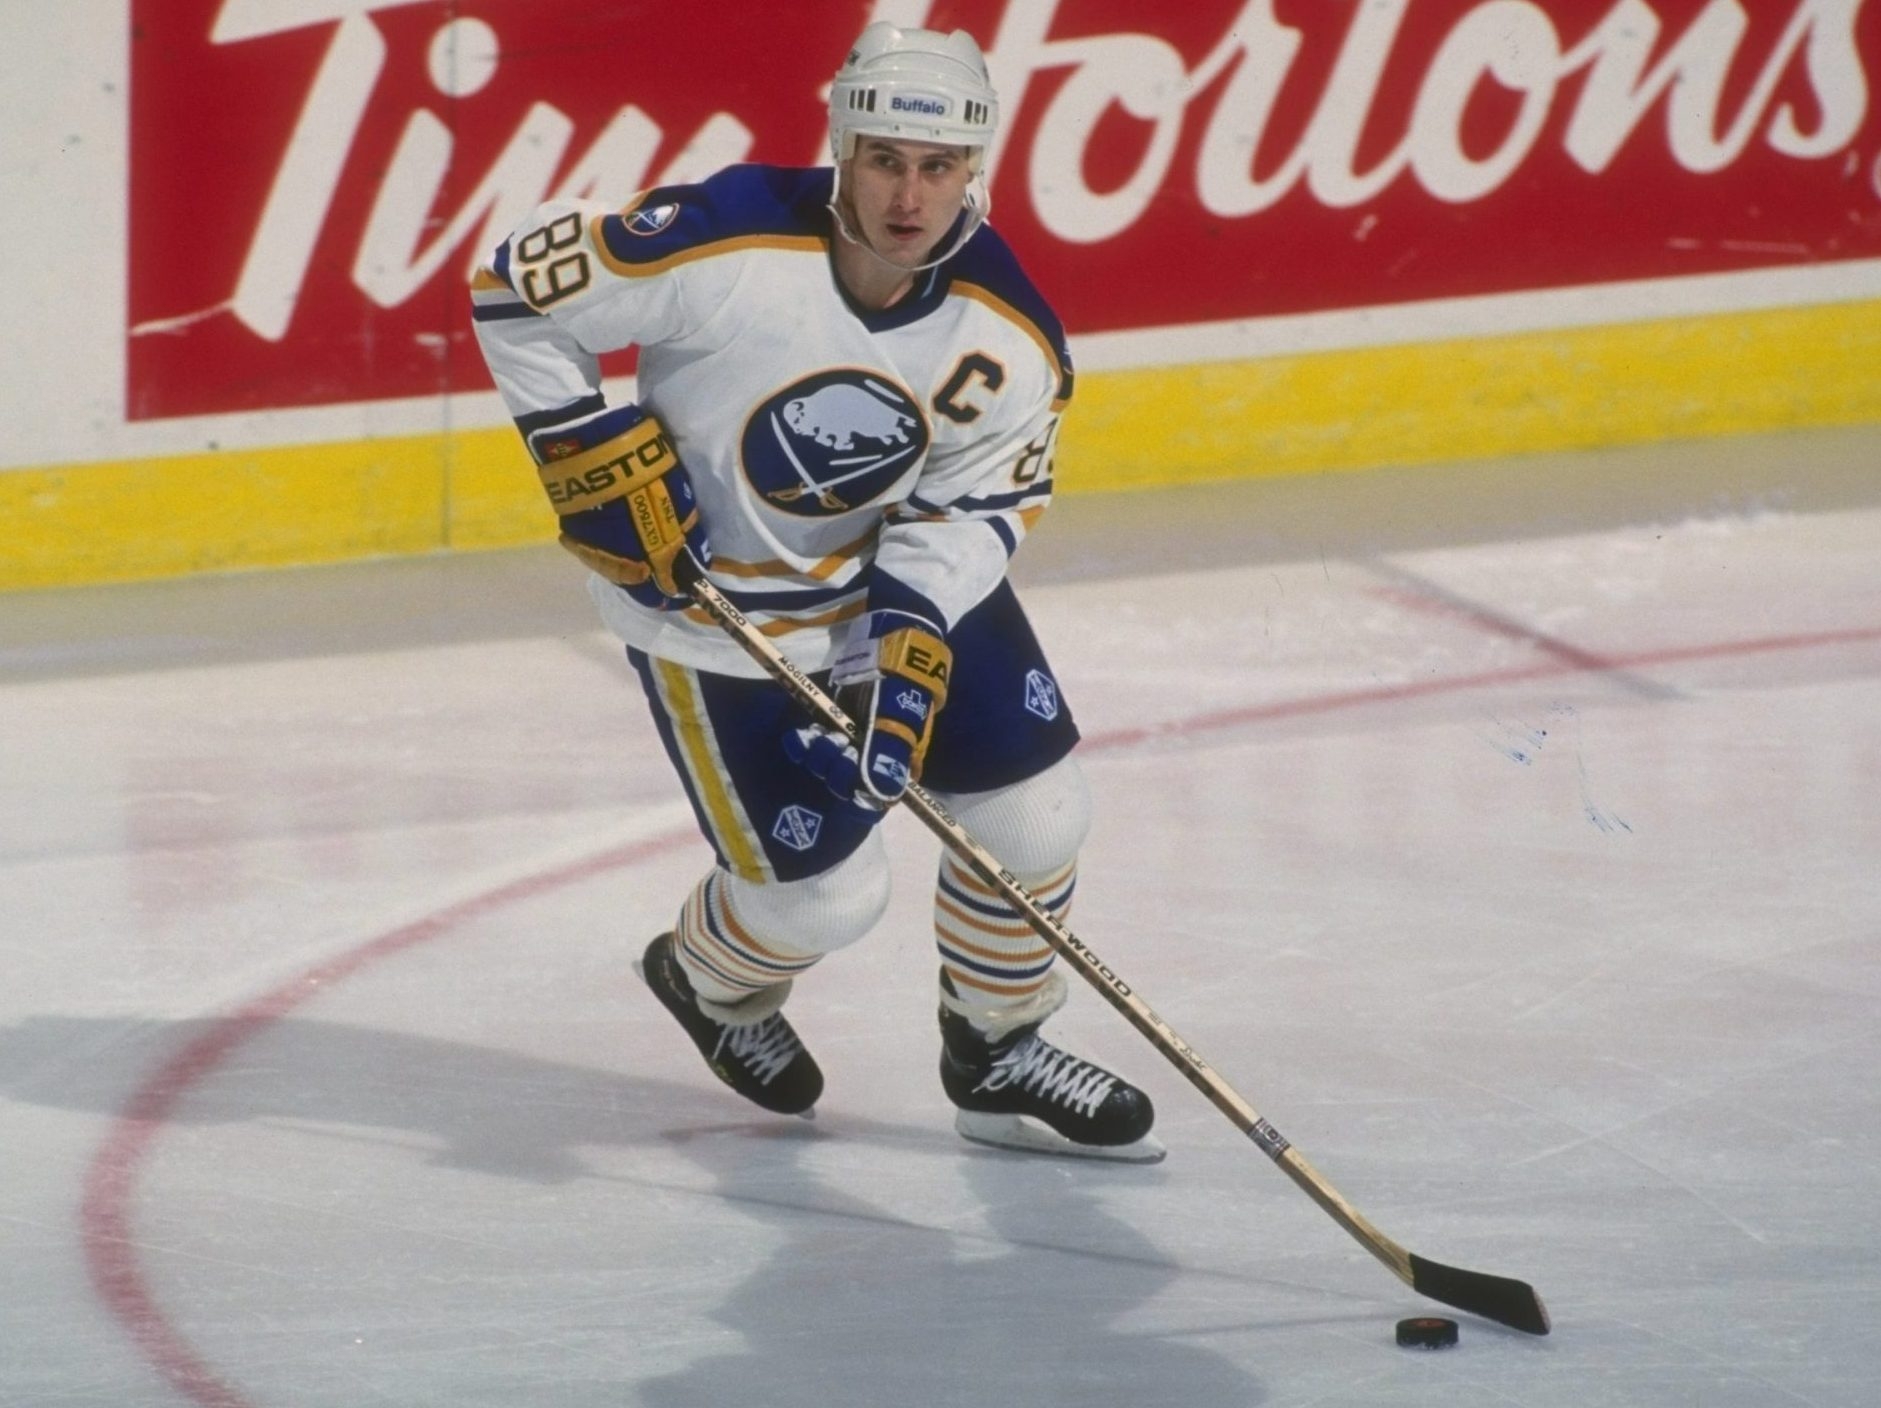 Mogilny not headed to the Hockey Hall of Fame this year